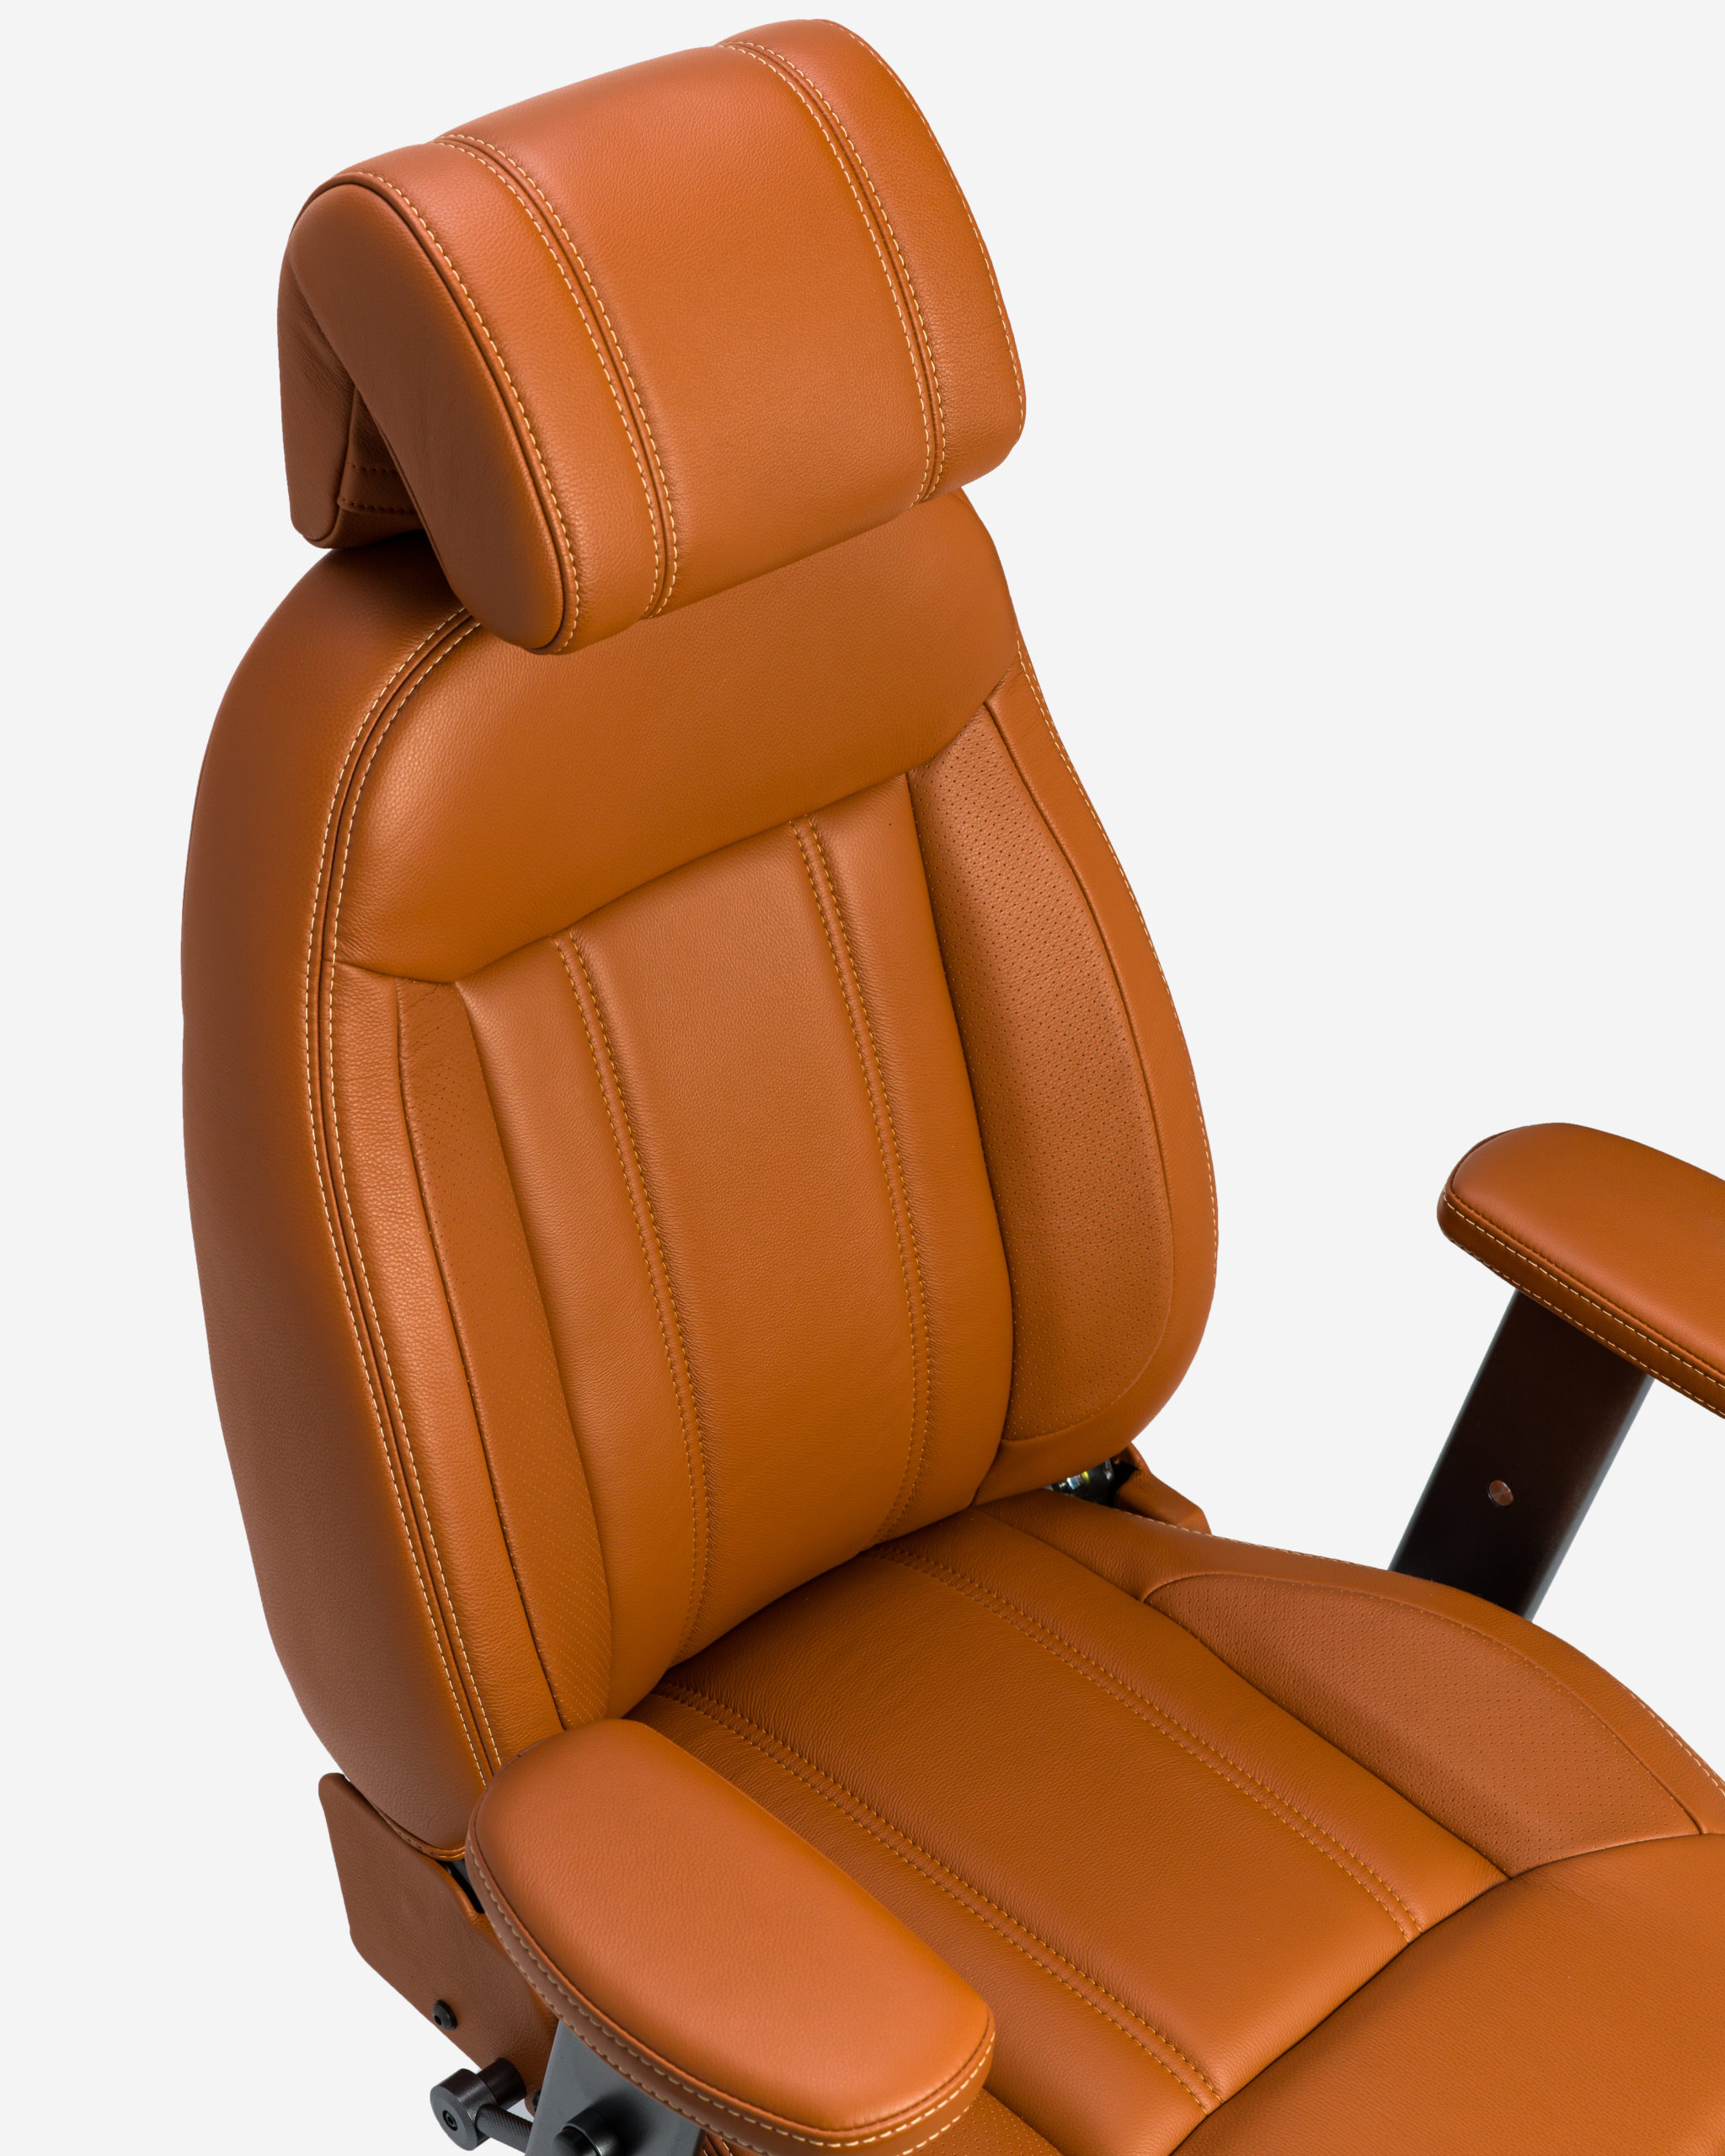 bourbon DLX chair, right top view